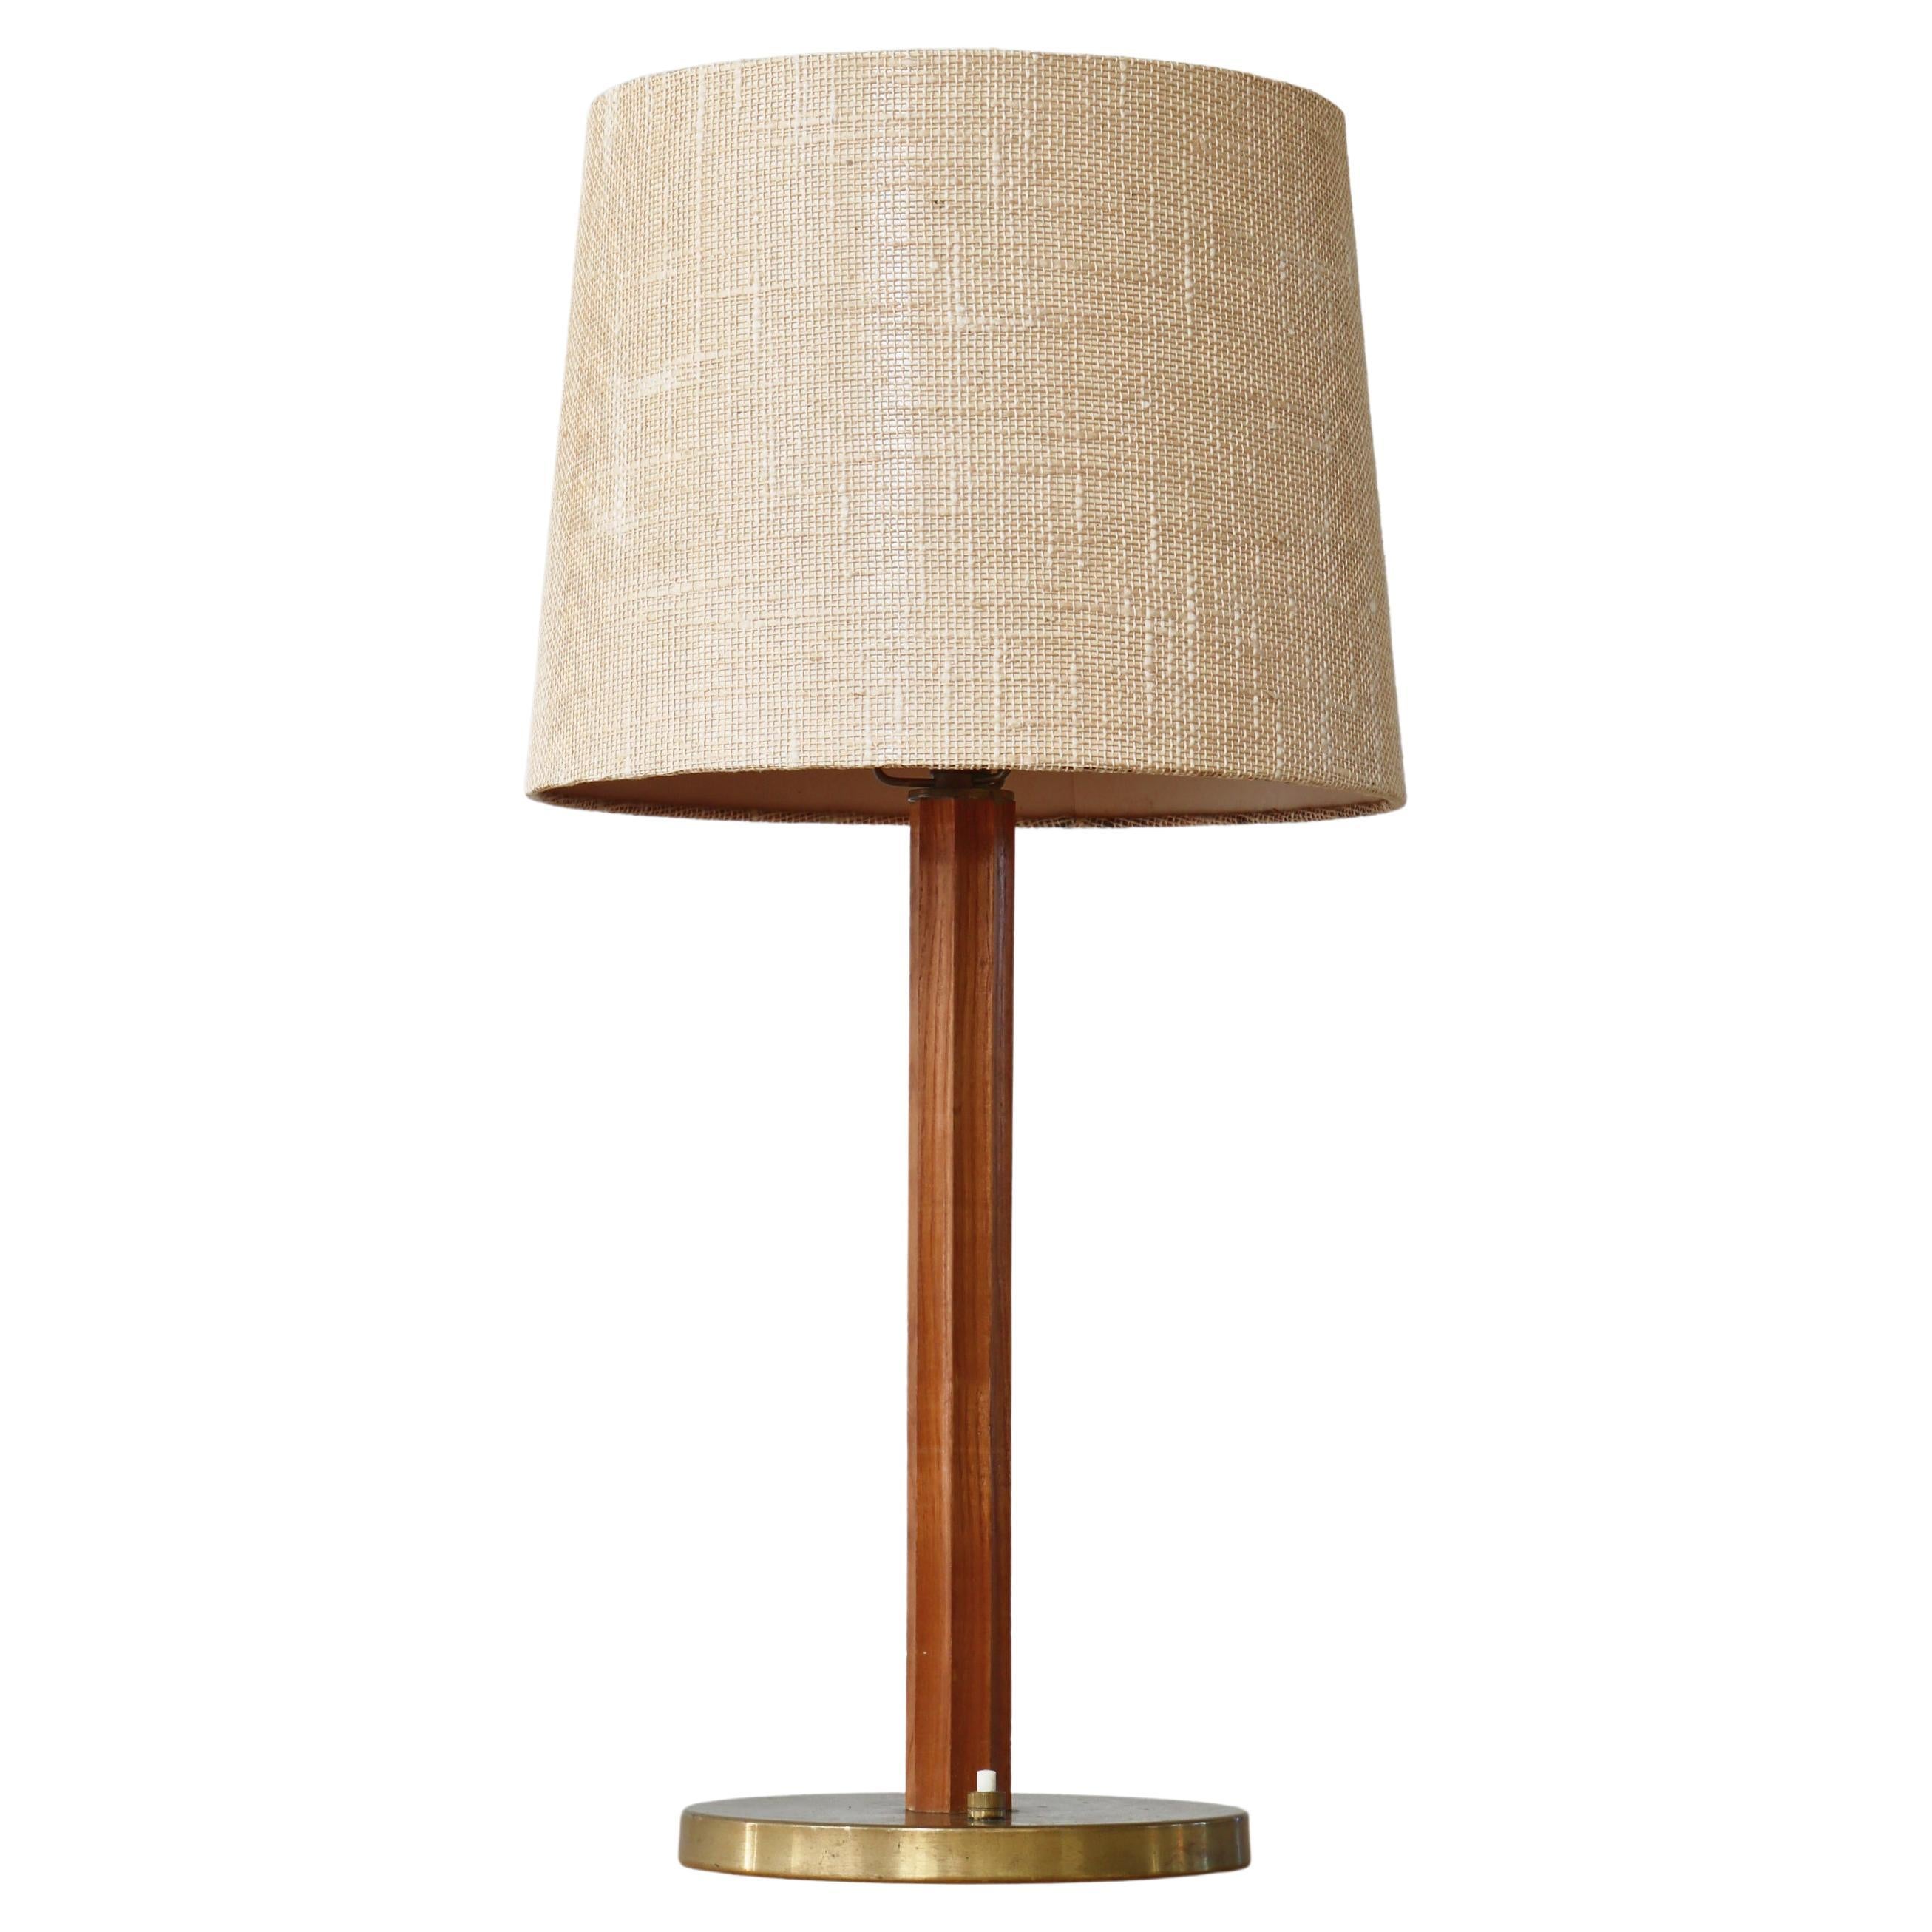 Scandinavian Modern "LYFA" Table Lamp from the 1950s For Sale